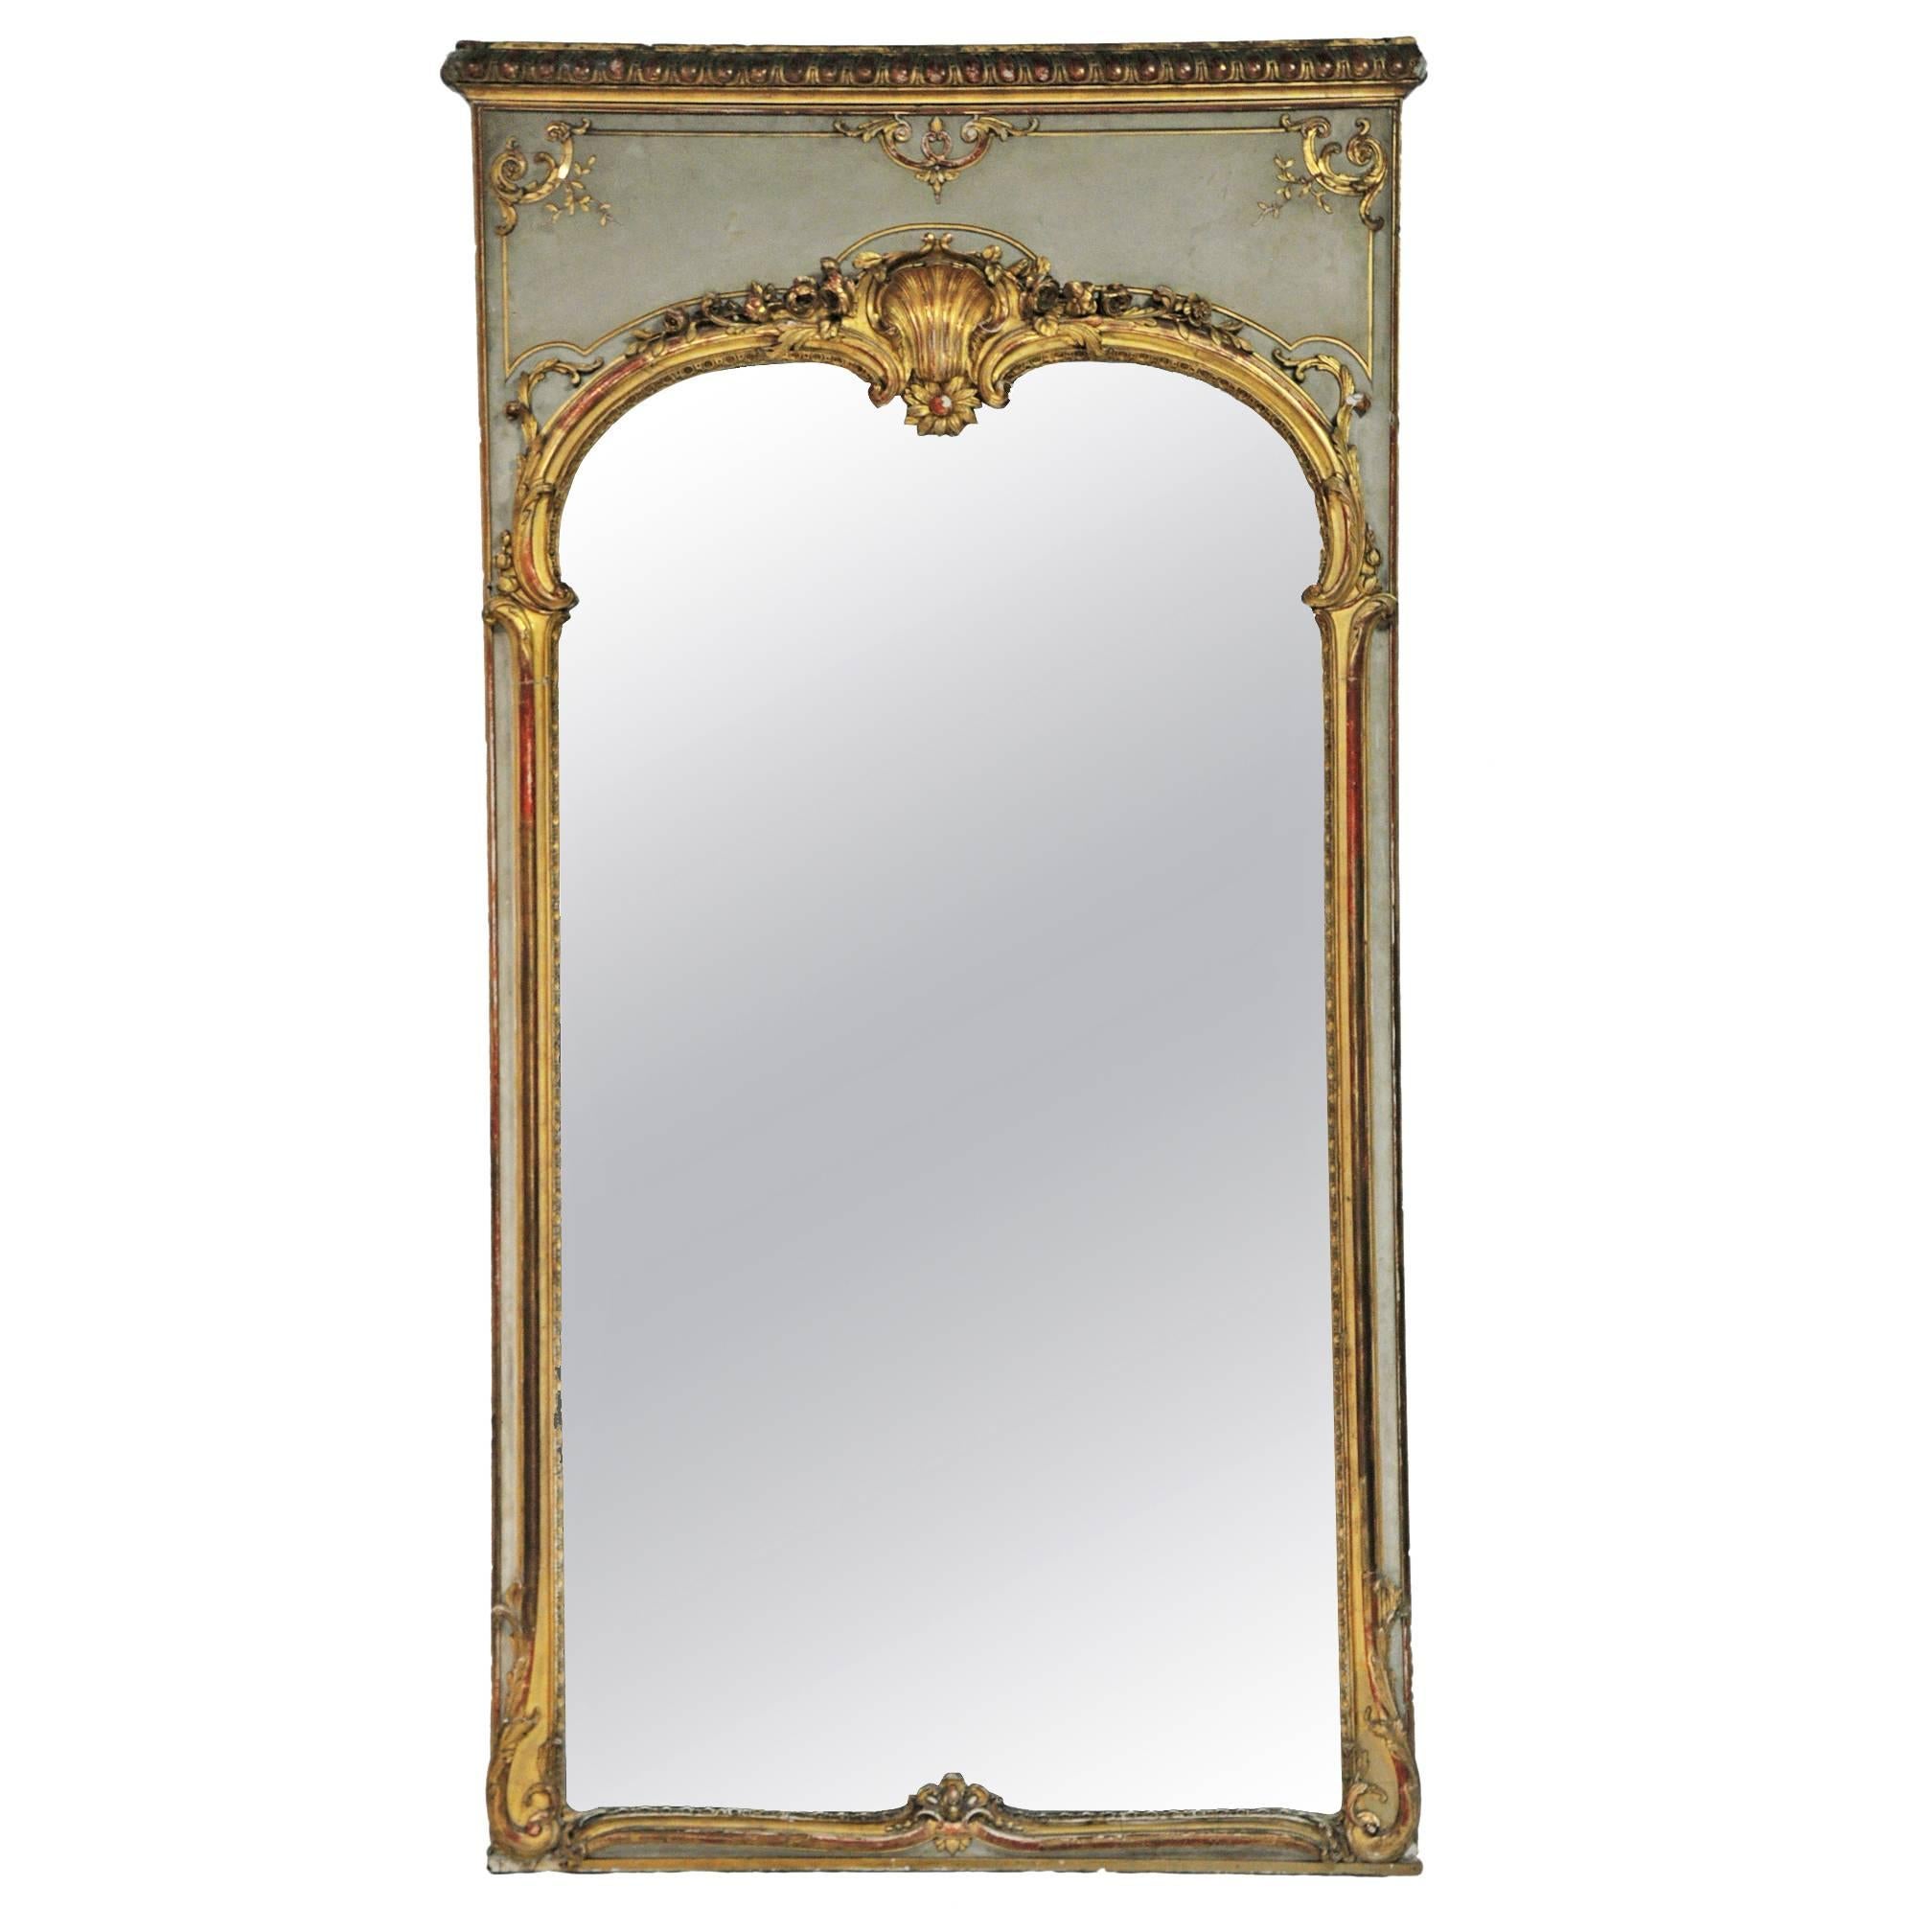 Large 19th C. Louis XV Trumeau Style Mirror with Old Paint